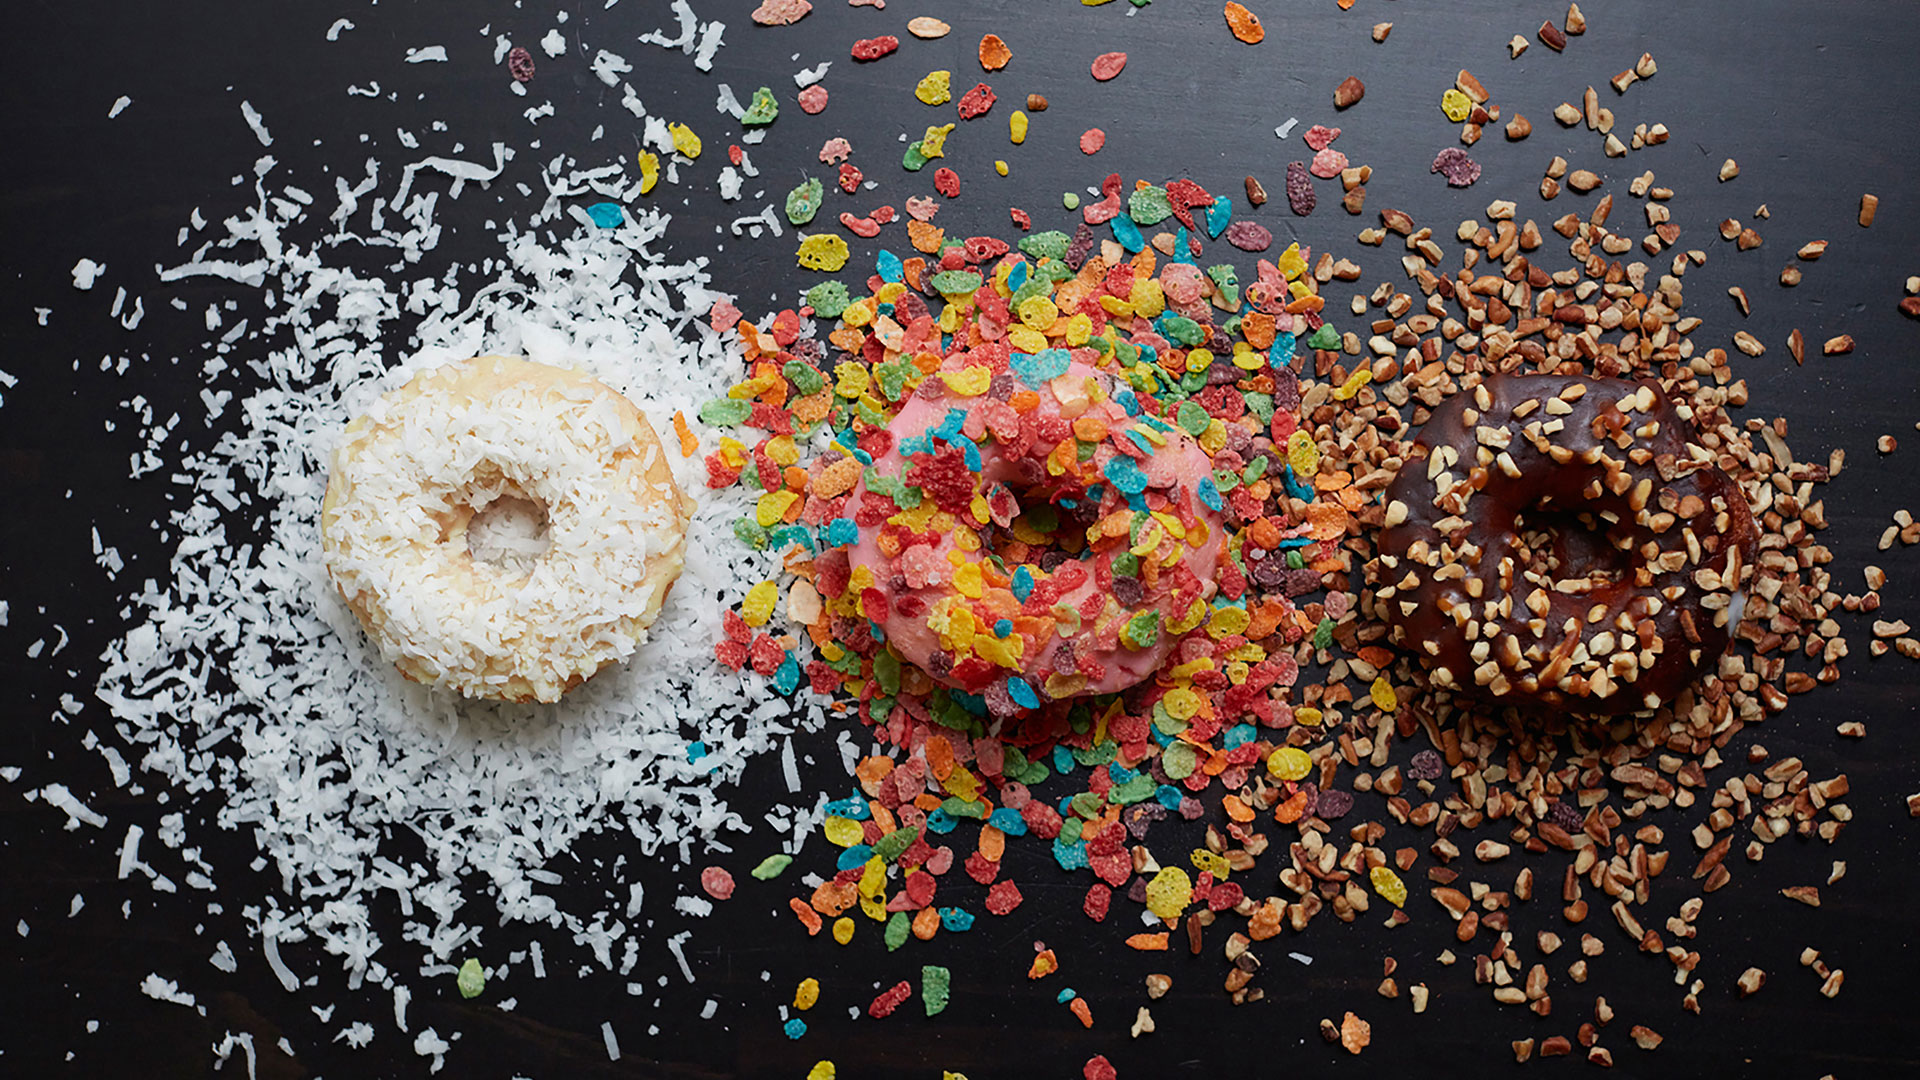 Vanilla and coconut, strawberry and fruit cereal, and chocolate and nut donuts styled and photographed by professional food and beverage photographer Kate Benson.